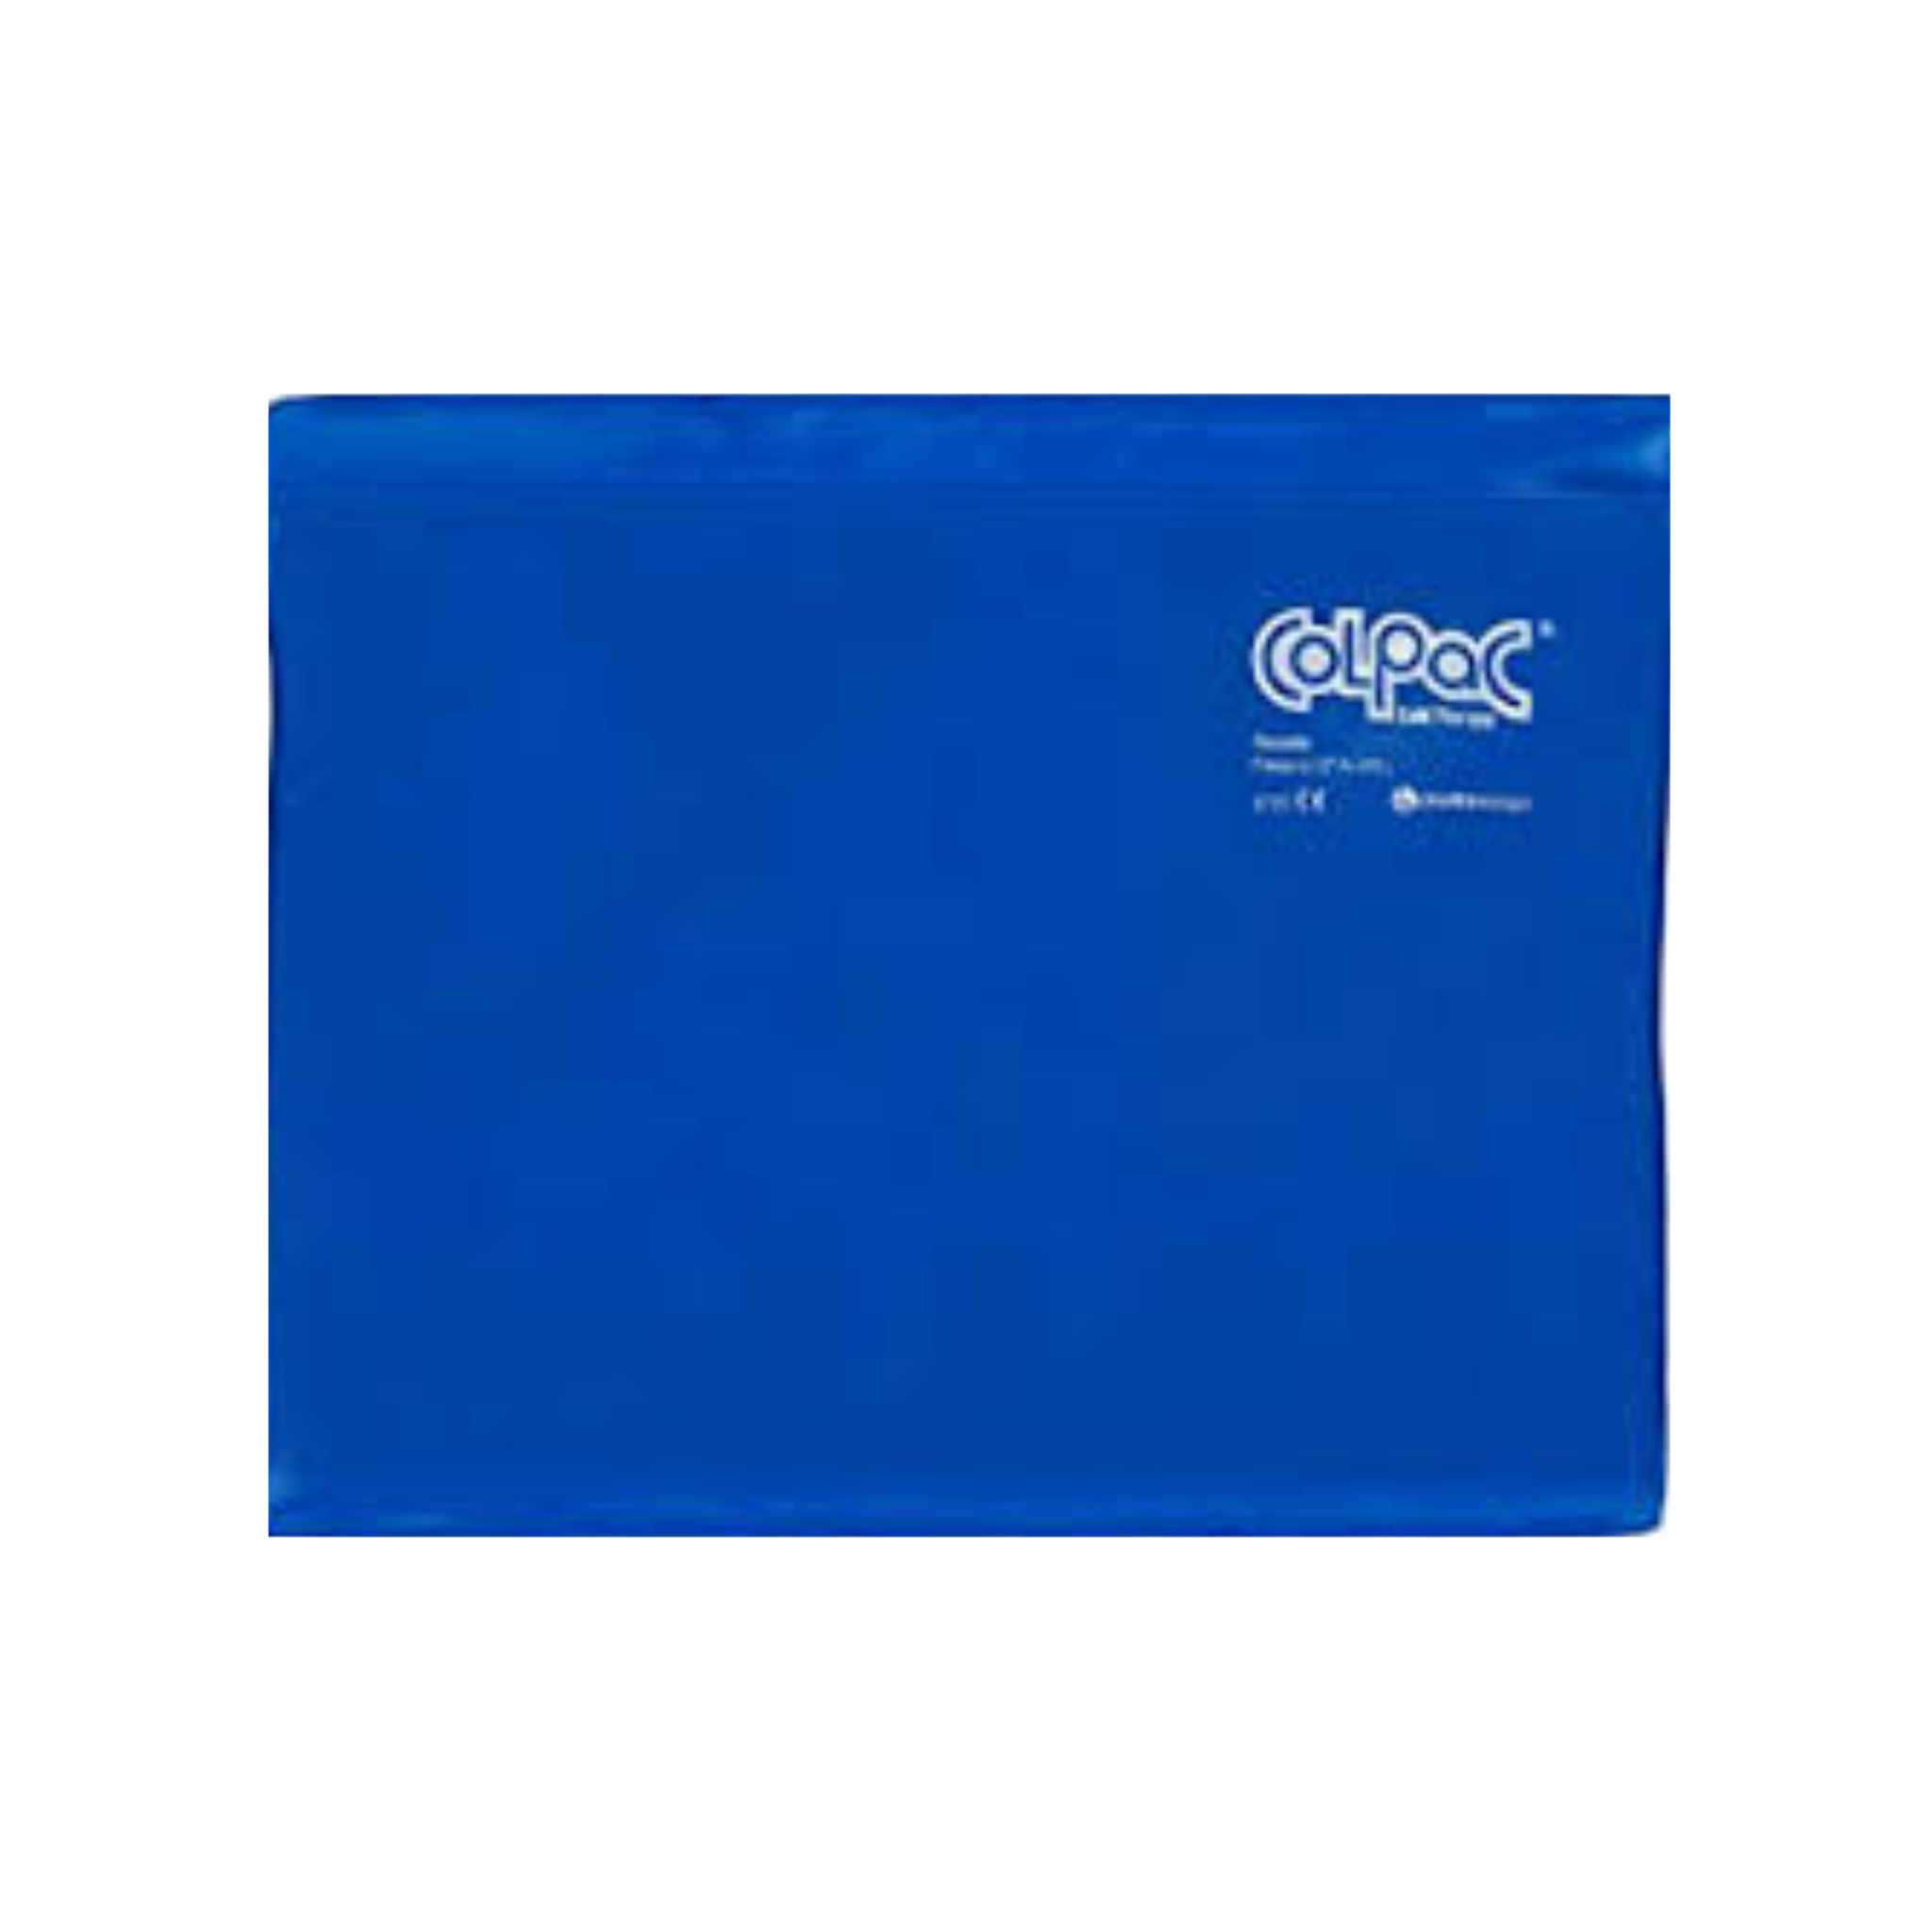 Chattanooga ColPac - Cold Therapy Packs in 3 Sizes